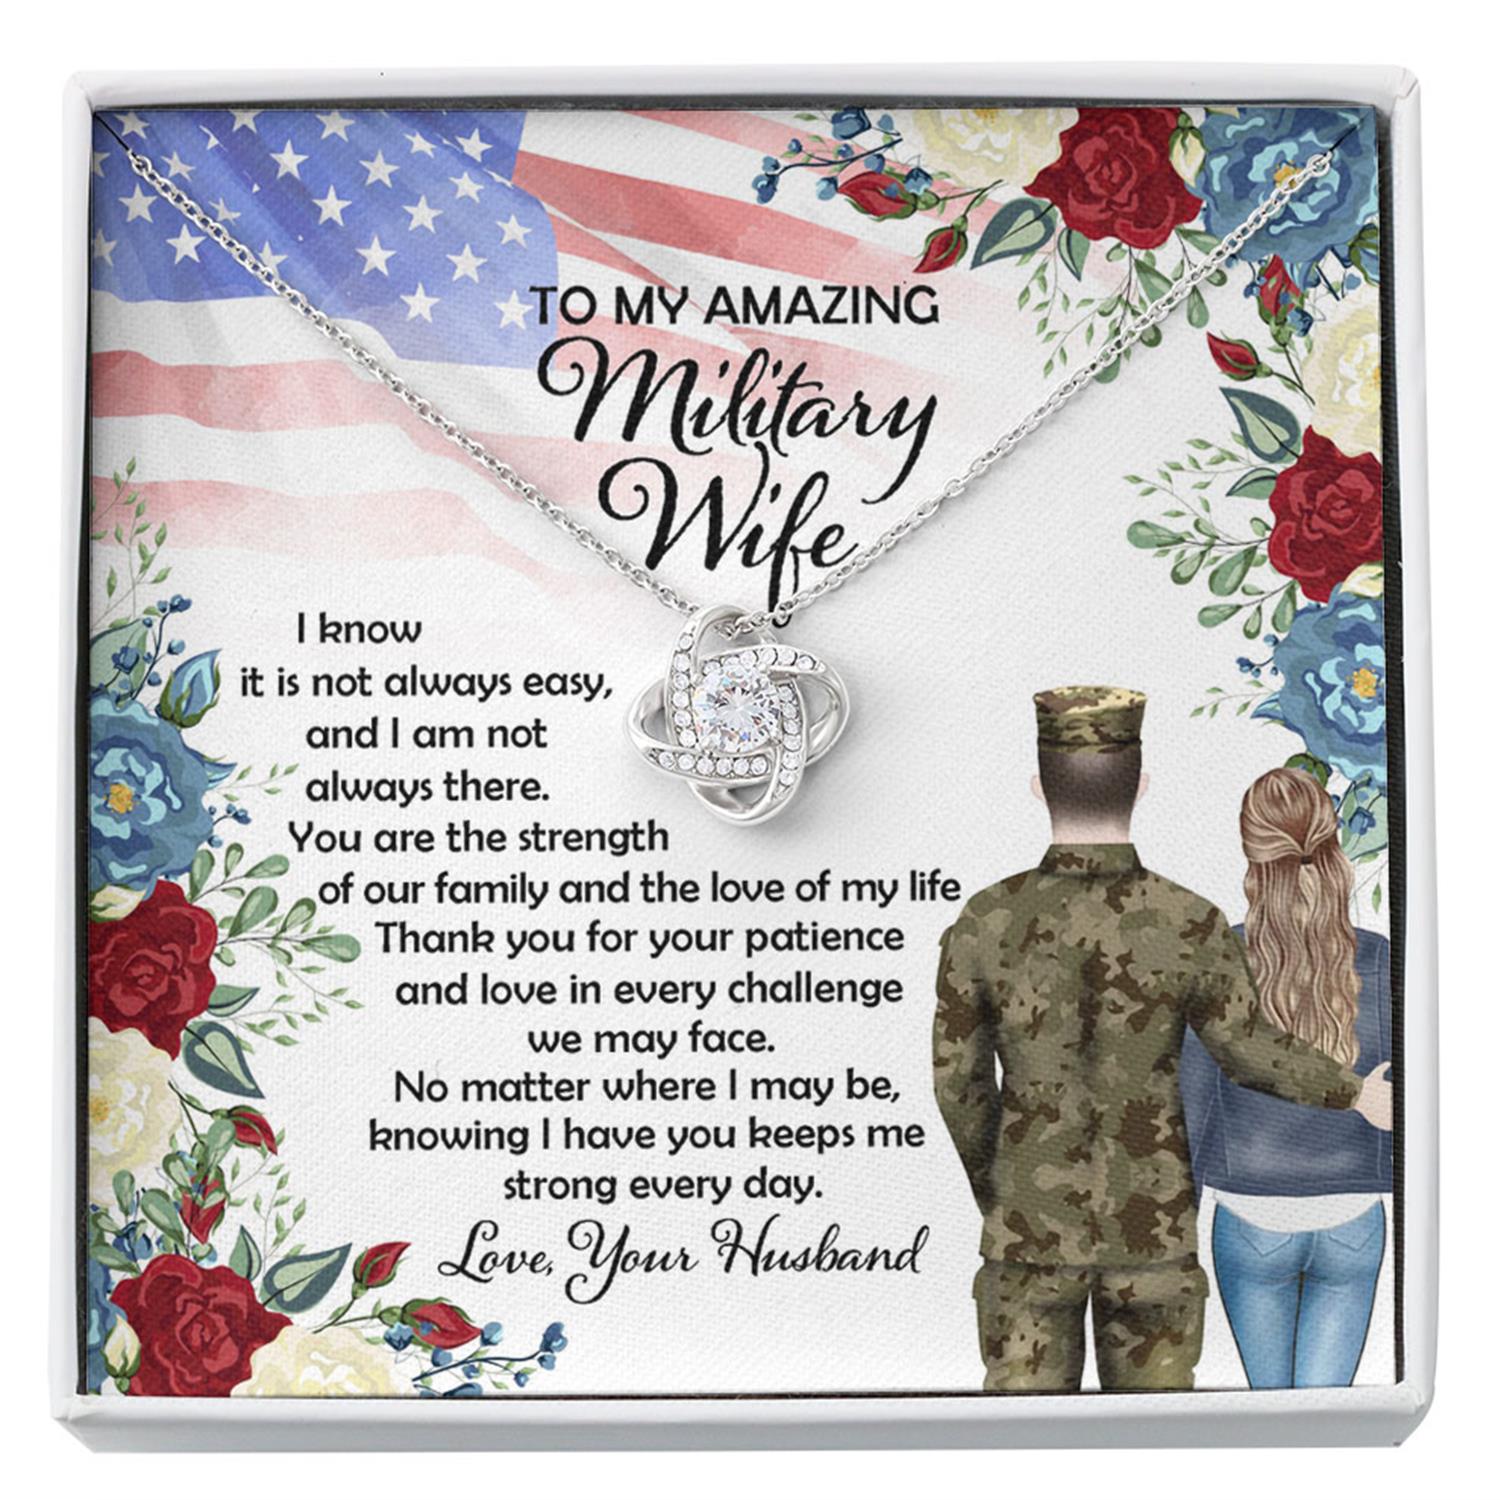 Wife Necklace, Military Wife Necklace Long Distance Wife Gift Wife Necklace Card Army Wife Necklace Best Navy Wife Wife Christmas Custom Necklace